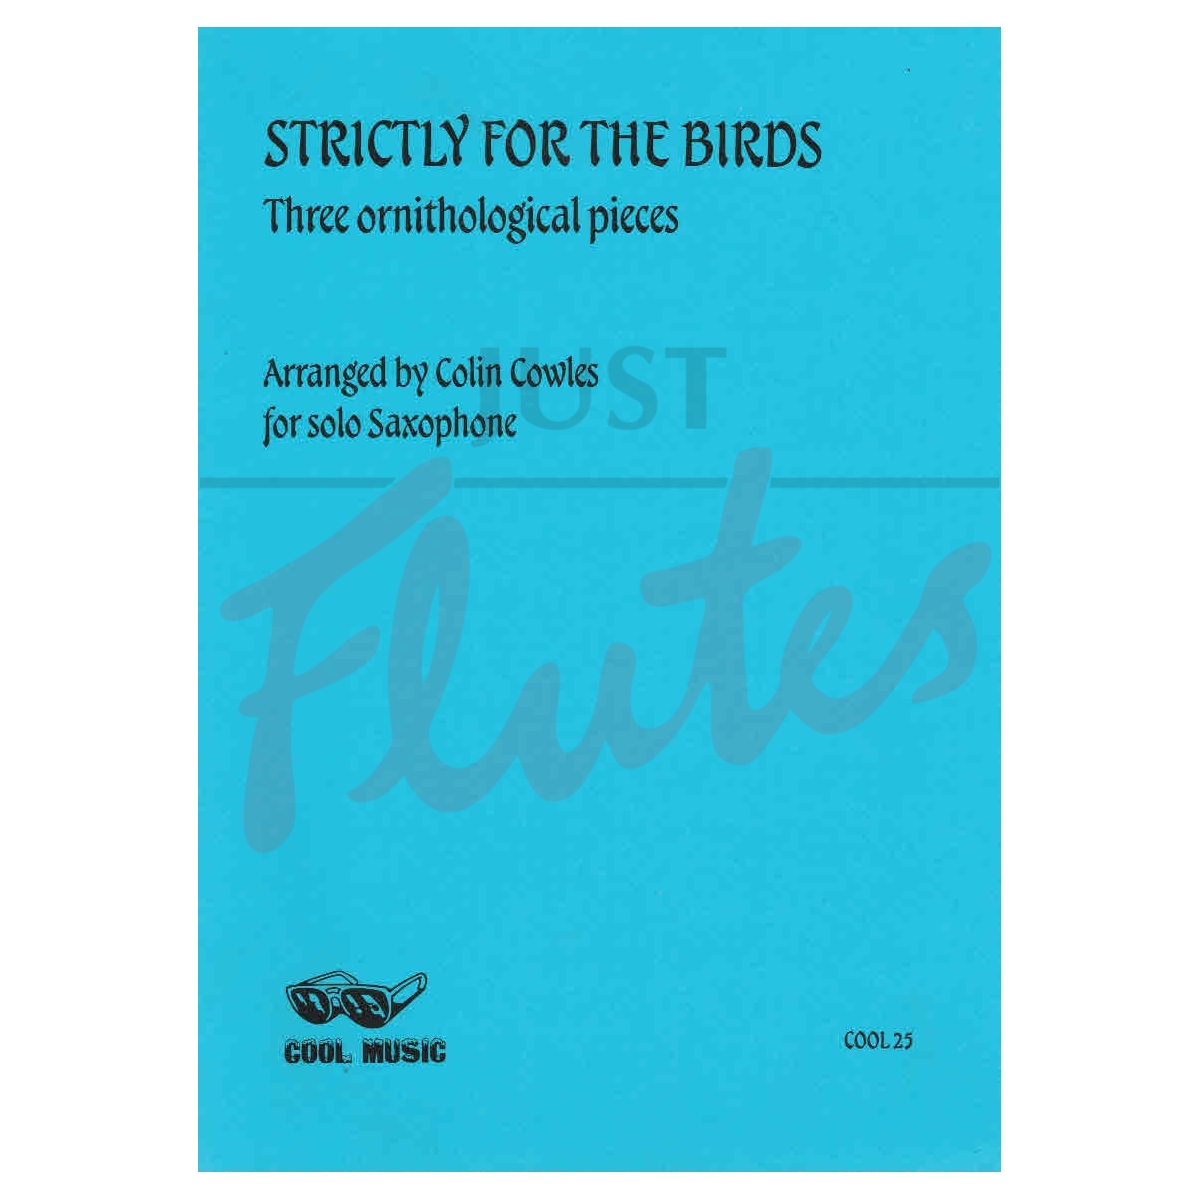 Strictly for the Birds